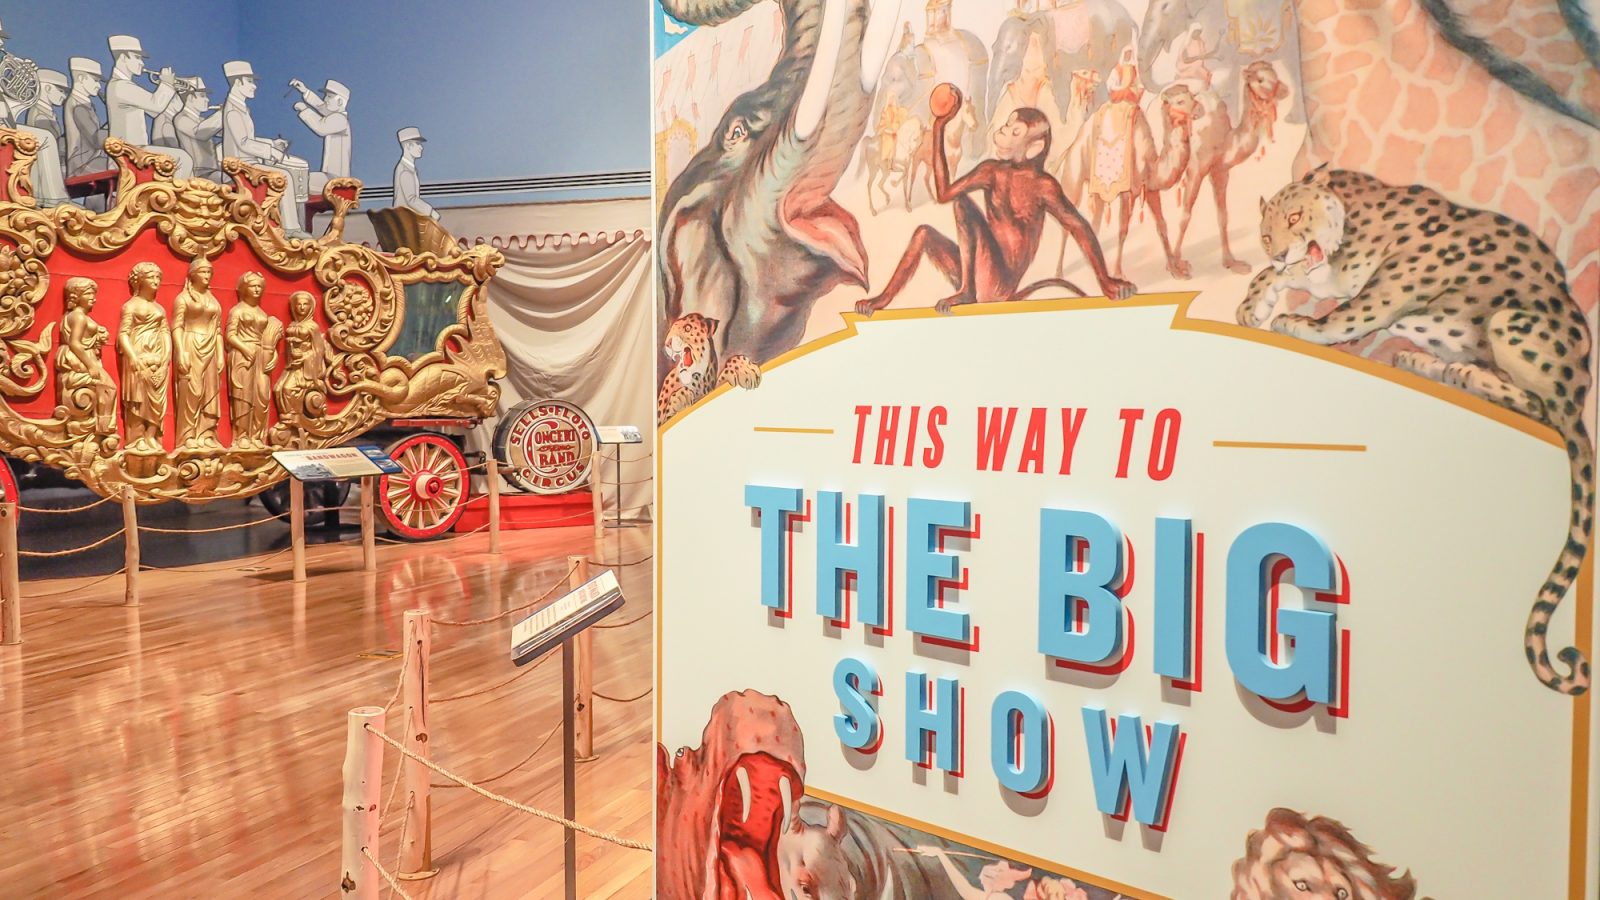 How creepy is the creepy Ringling Brothers Circus Museum in Sarasota, Florida? Very.